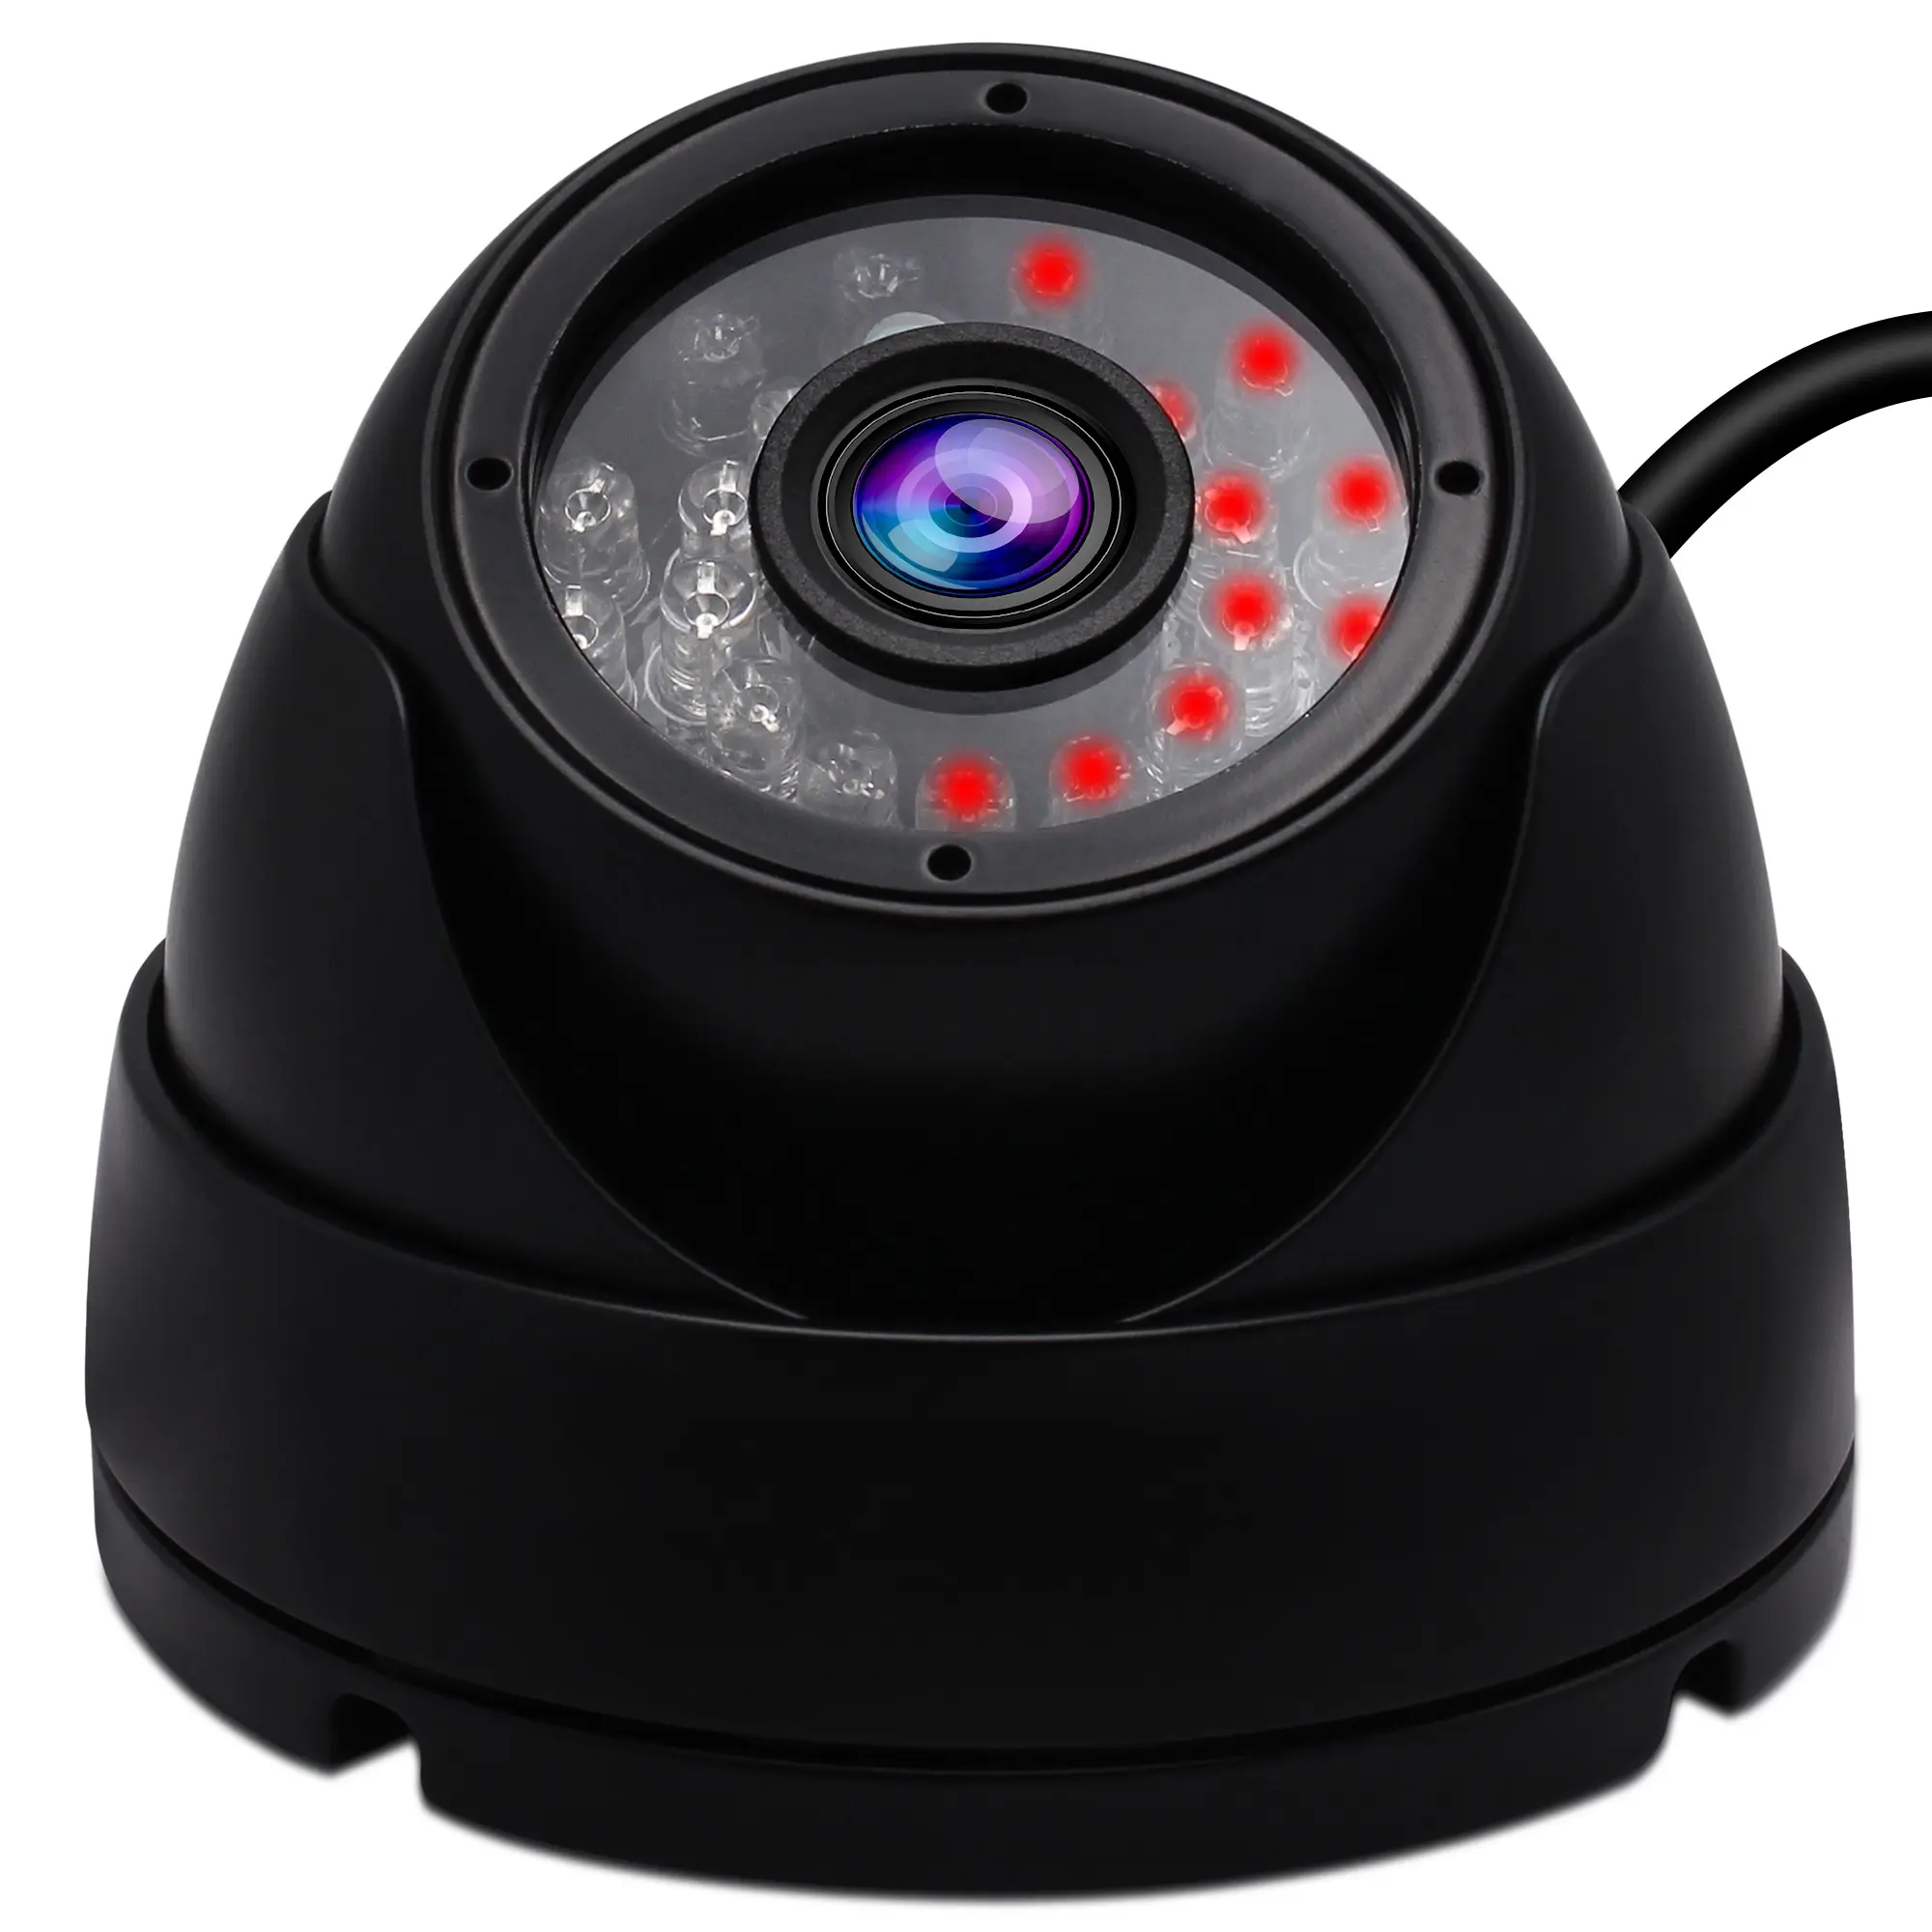 Outdoor Waterproof Mini CCTV Dome Webcam IR Infrared Night Vision 2 Megapixel 1080p H.264 USB Camera With 3.6mm Lens